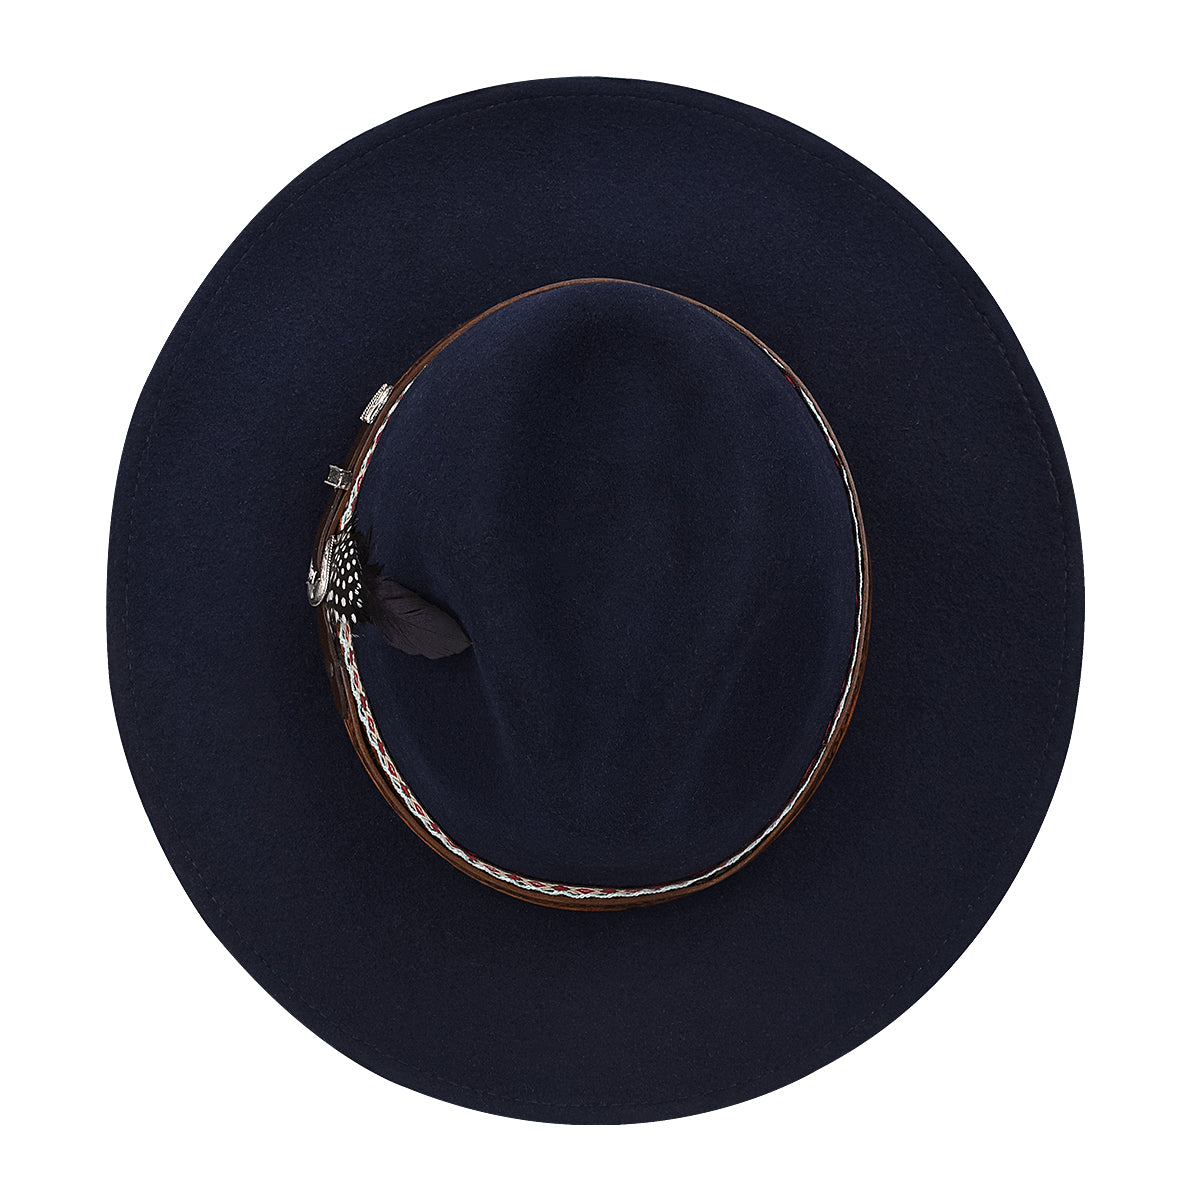 Cuadra blue hat with fabric belt and feathers